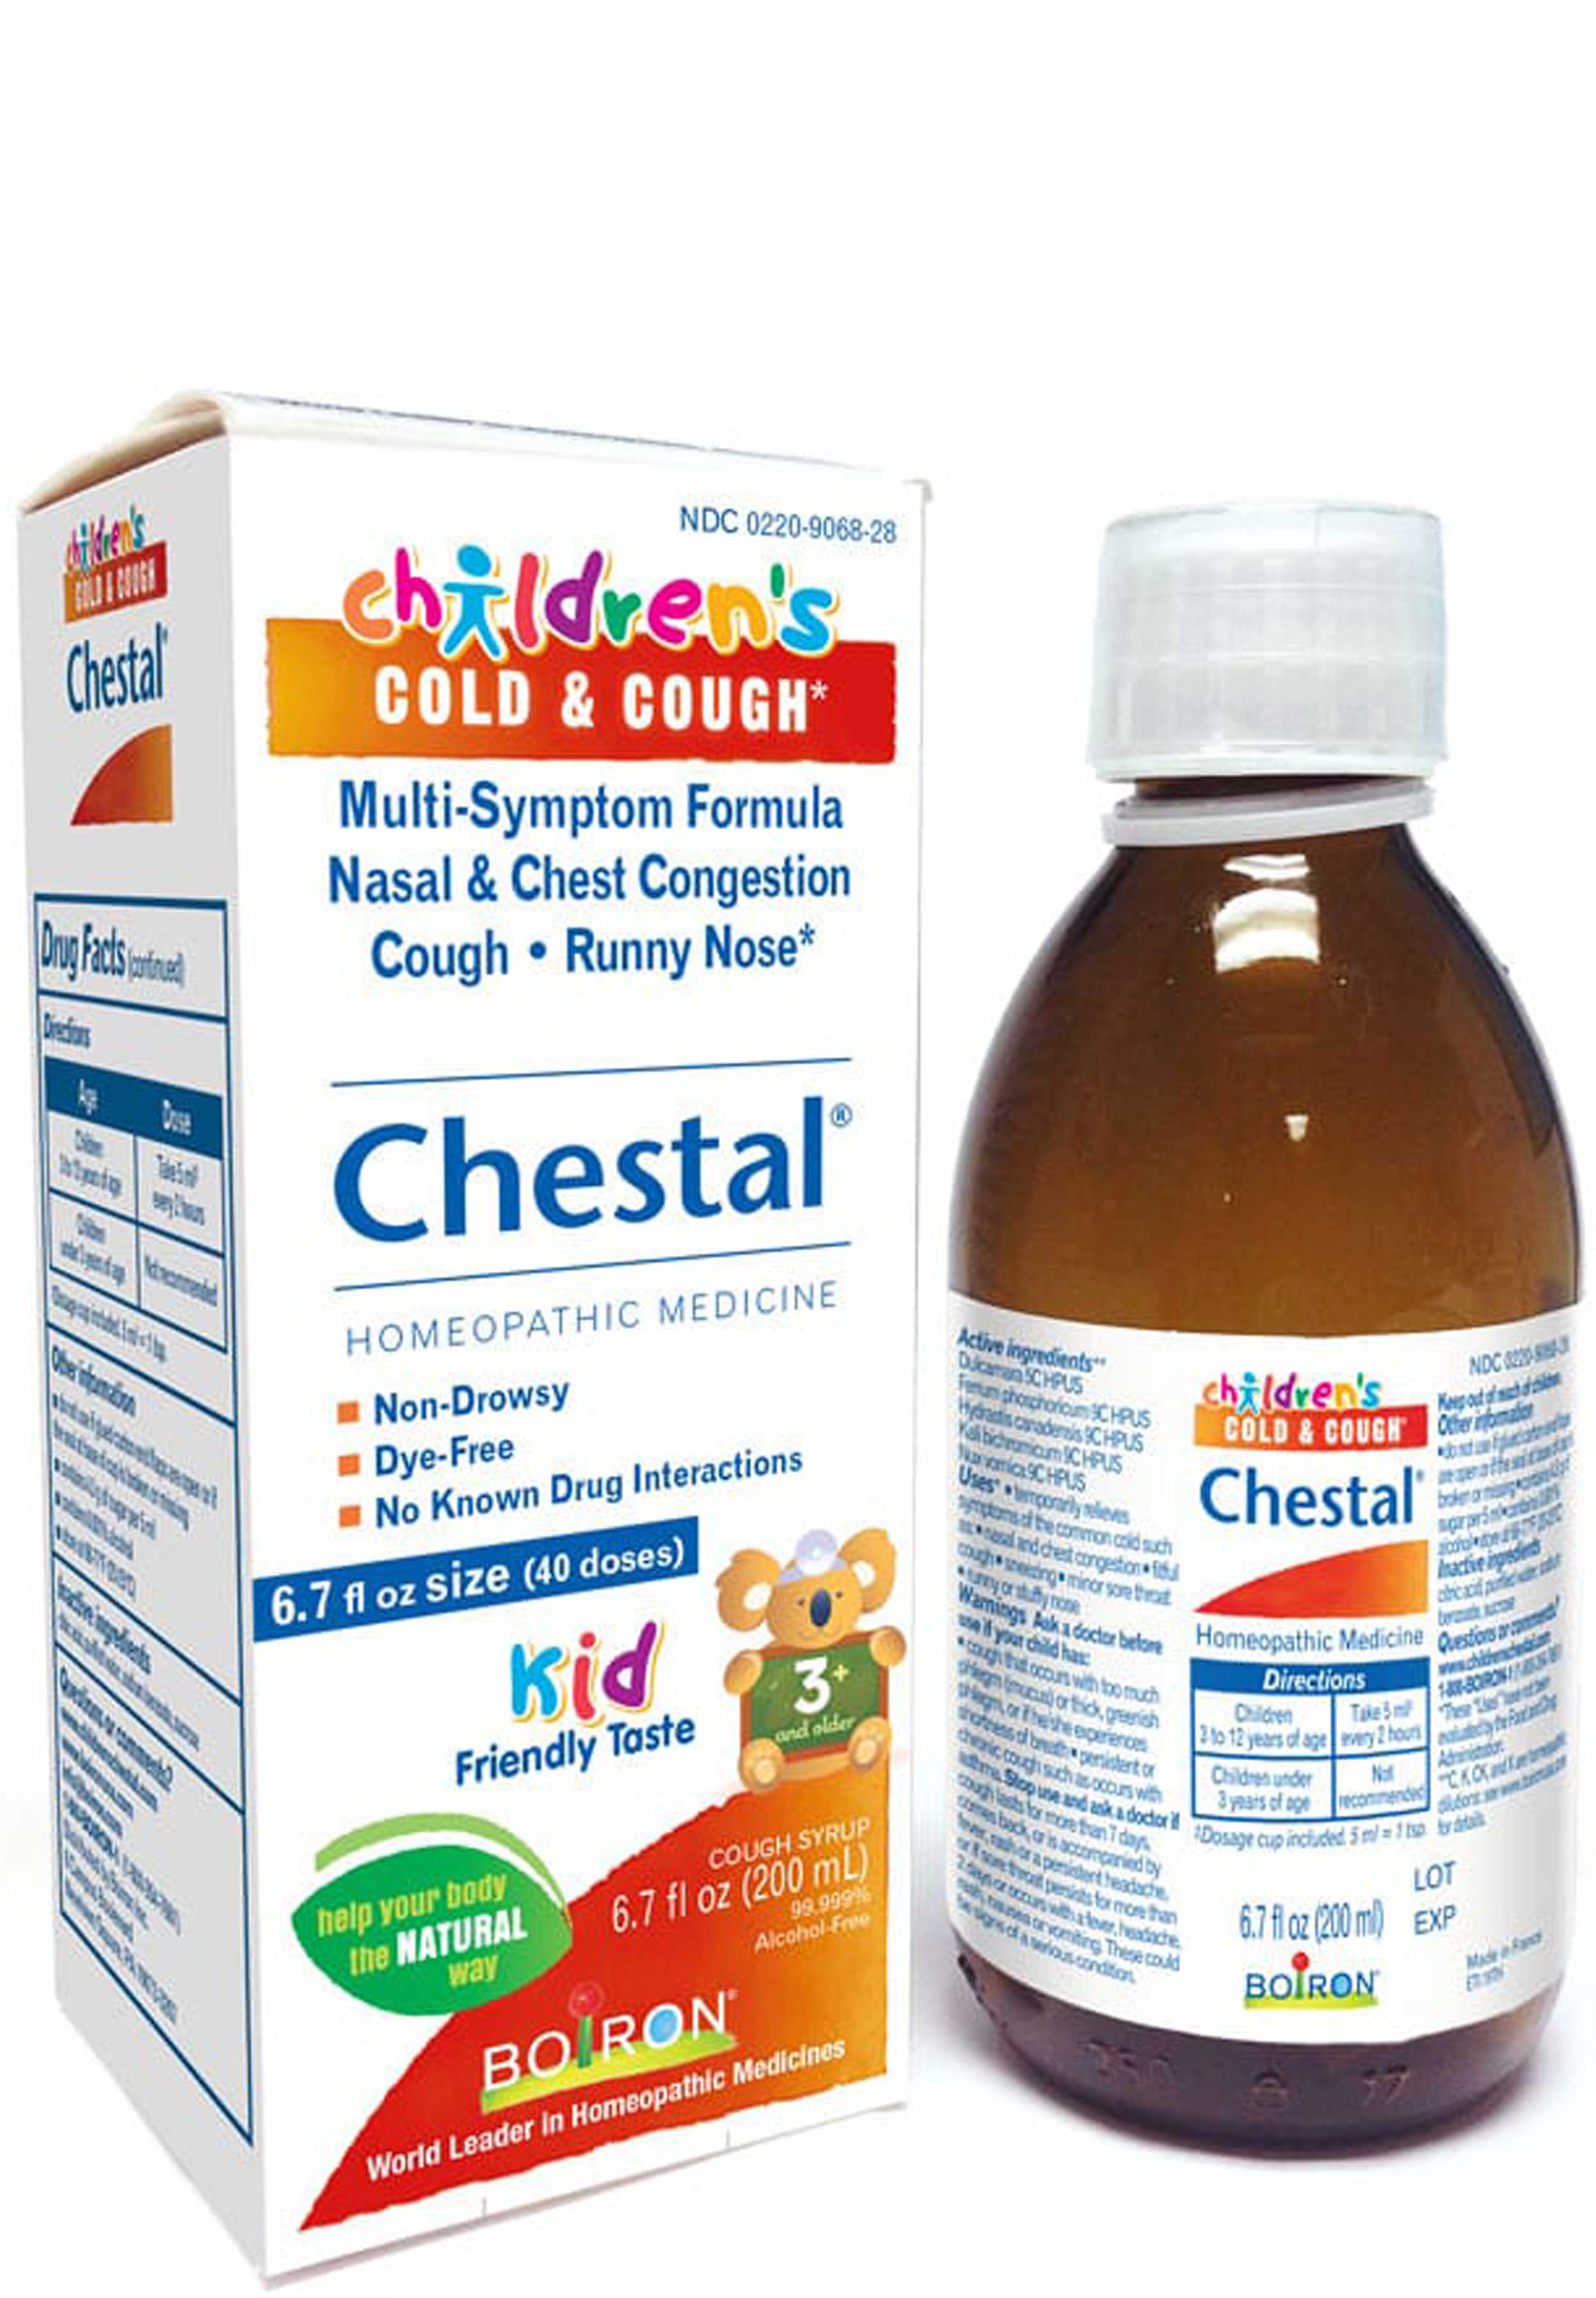 Boiron Homeopathics Chestal Children's Cold & Cough